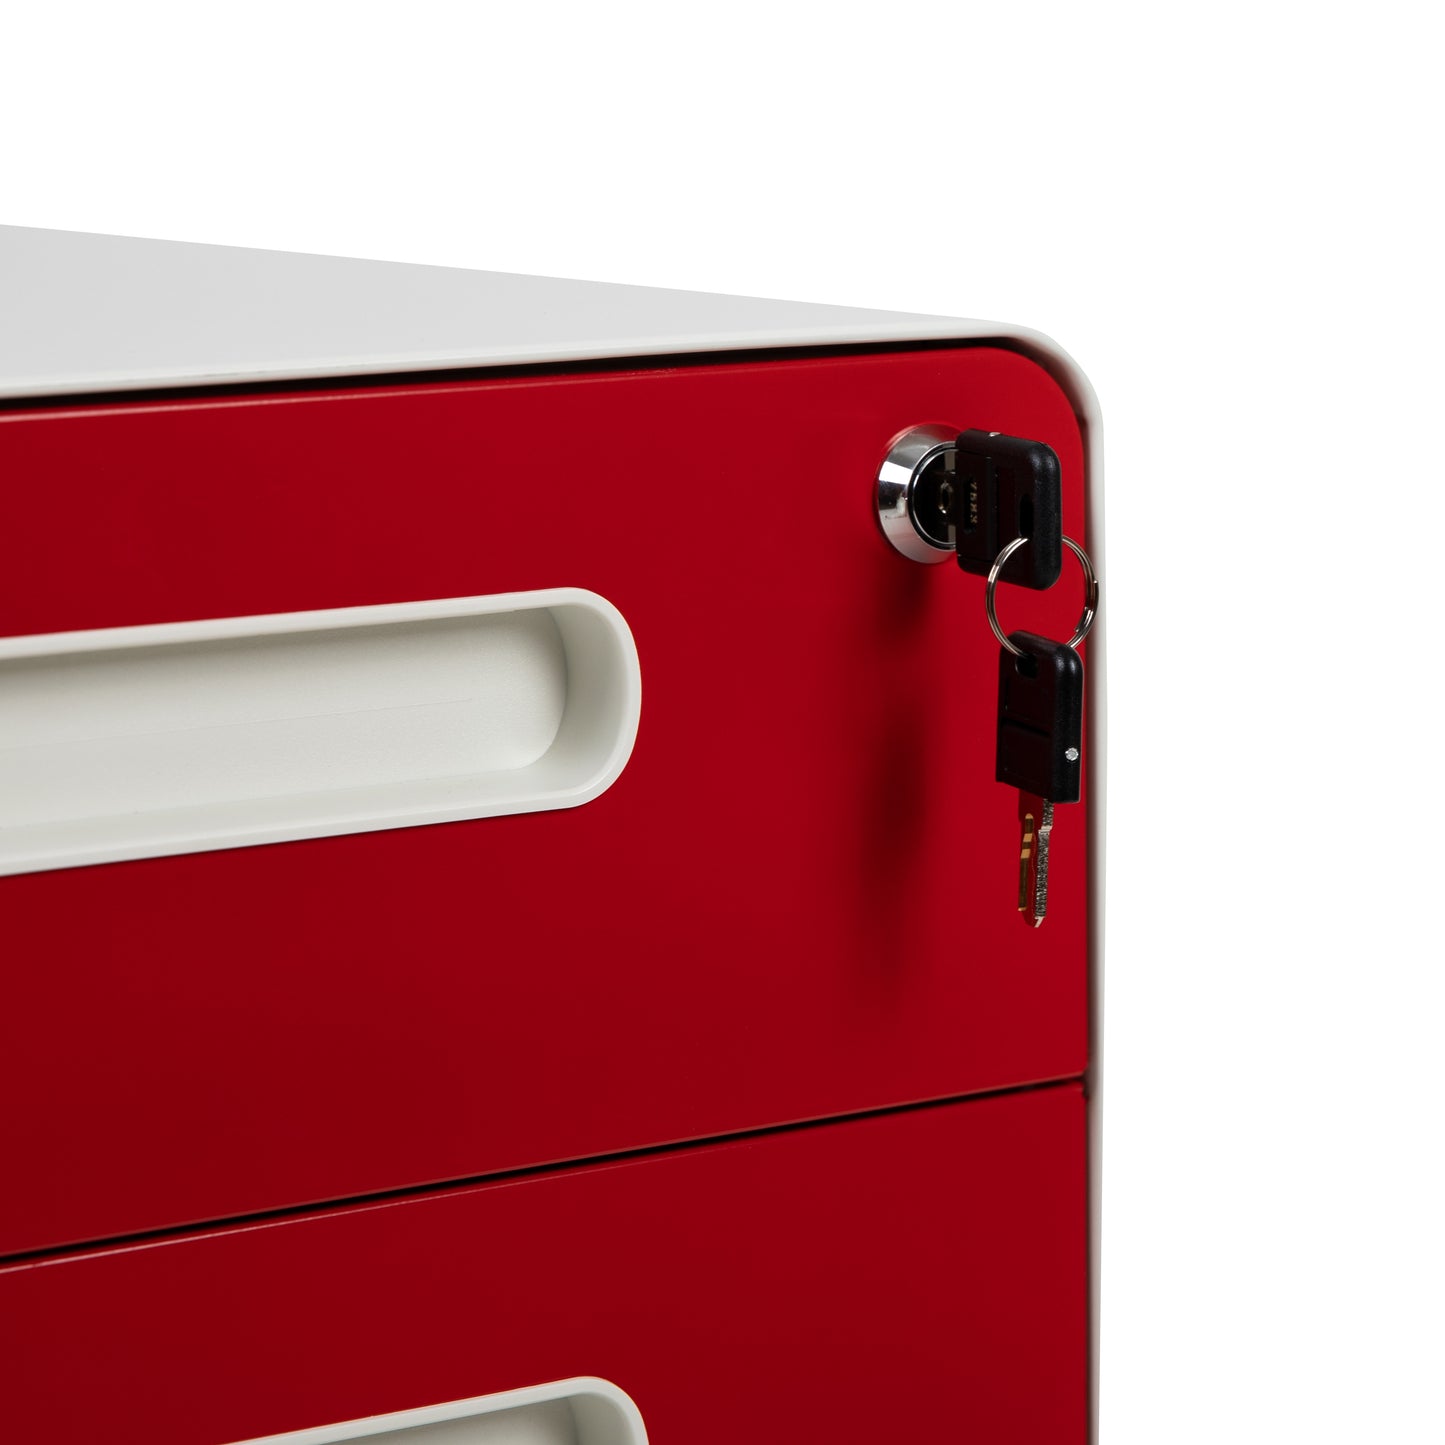 Drawer File Cabinet-White/Red HZ-AP535-02-RED-WH-GG